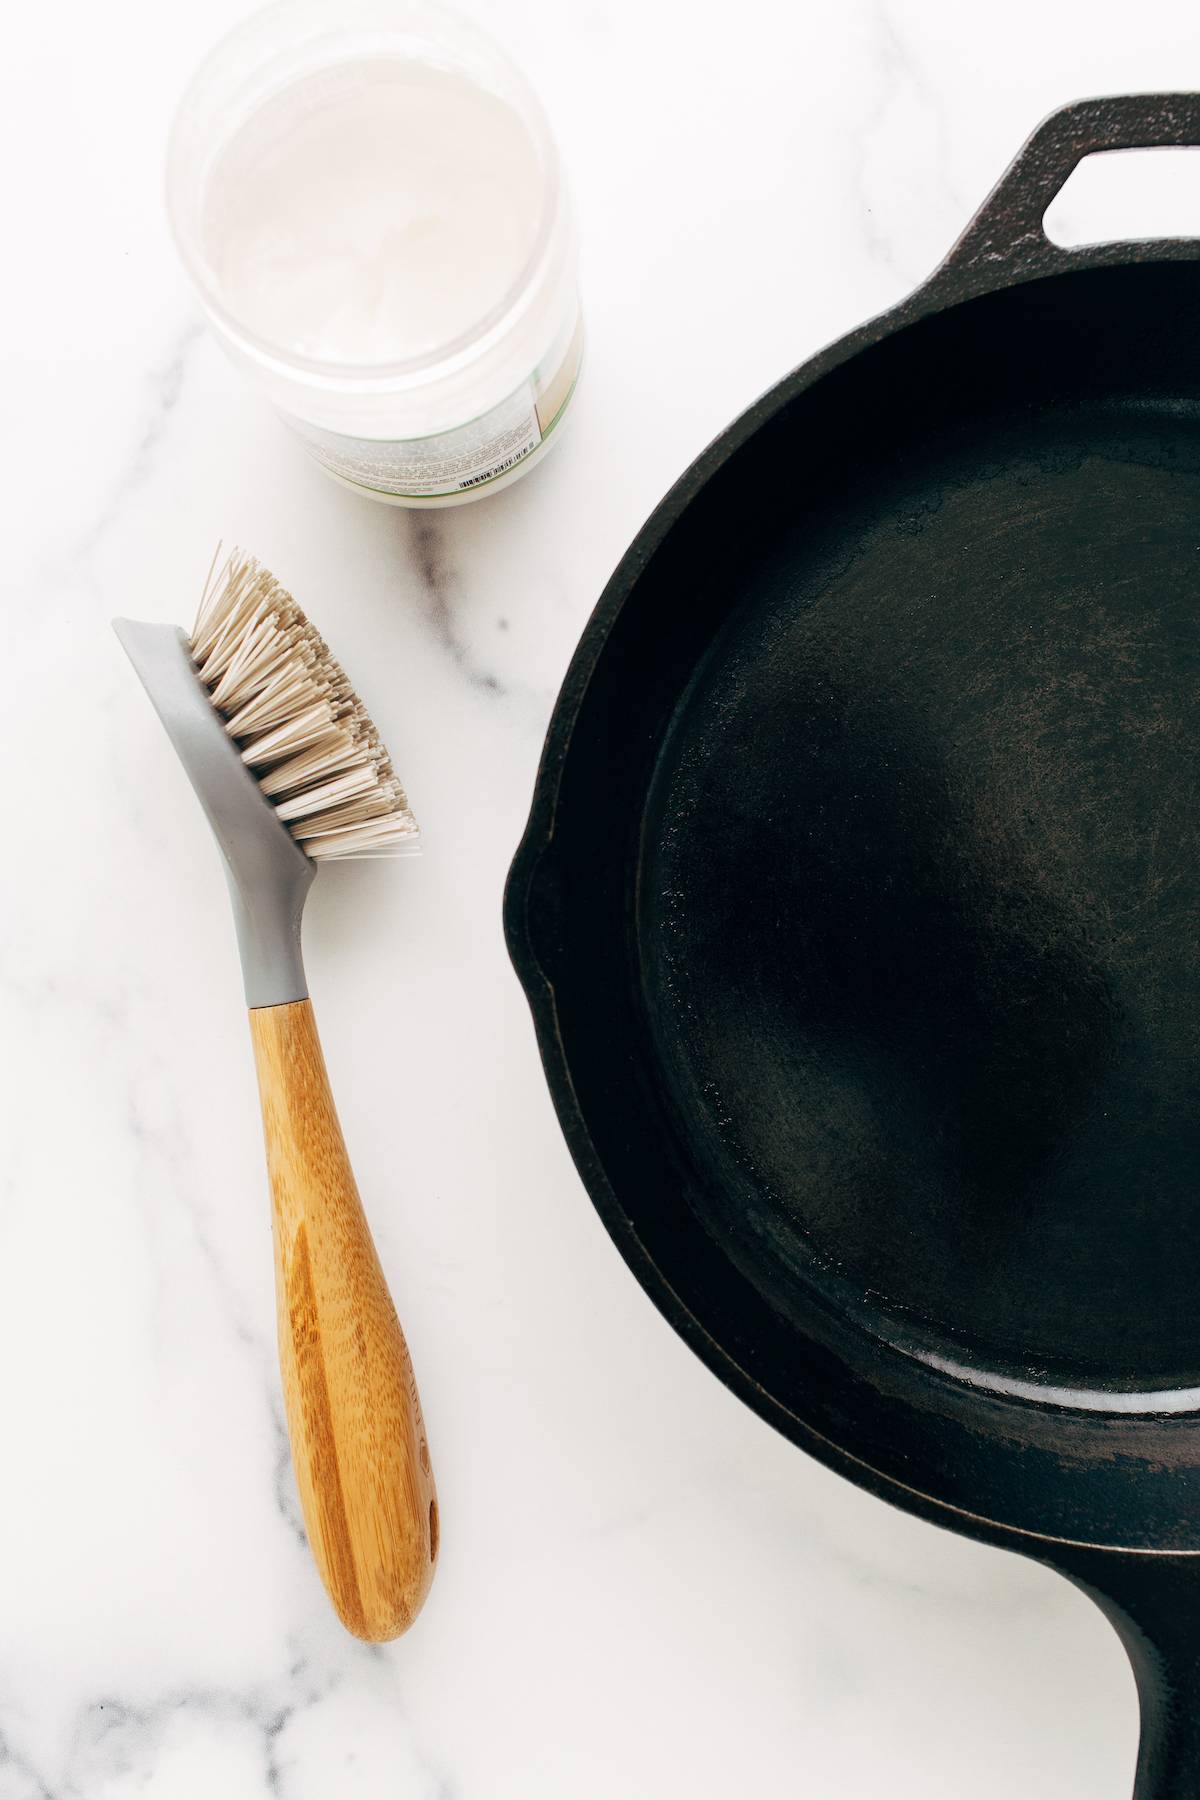 Pan made of cast iron with brush and coconut oil.